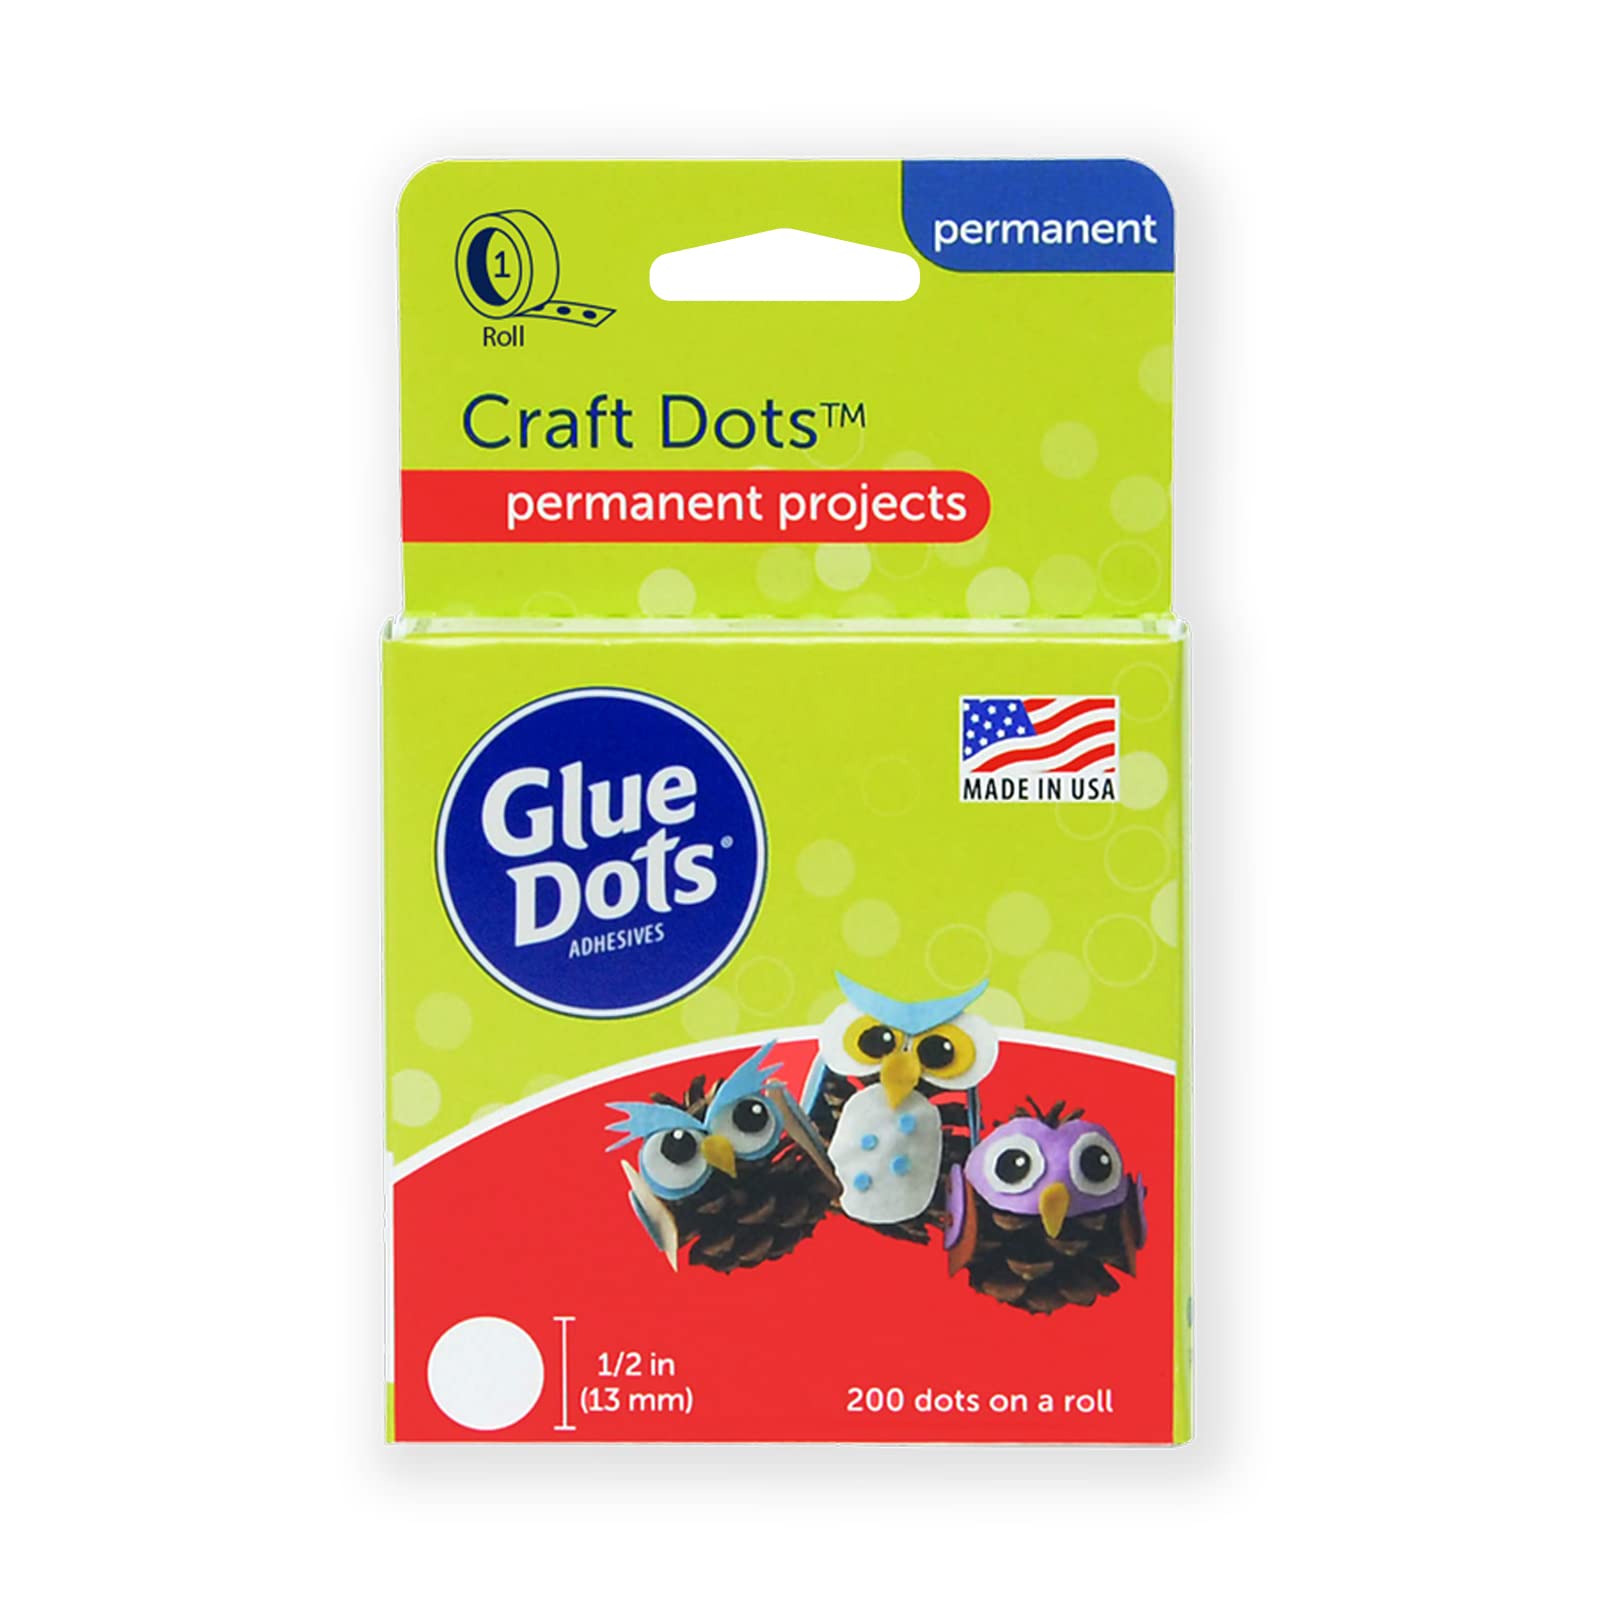 Glue Dots Dot N' Go Glue Dot Dispenser, 6 Pack & Dot N' Go Glue Dot  Dispenser Project Pack with 200 Permanent, Poster, and Removable  Double-Sided